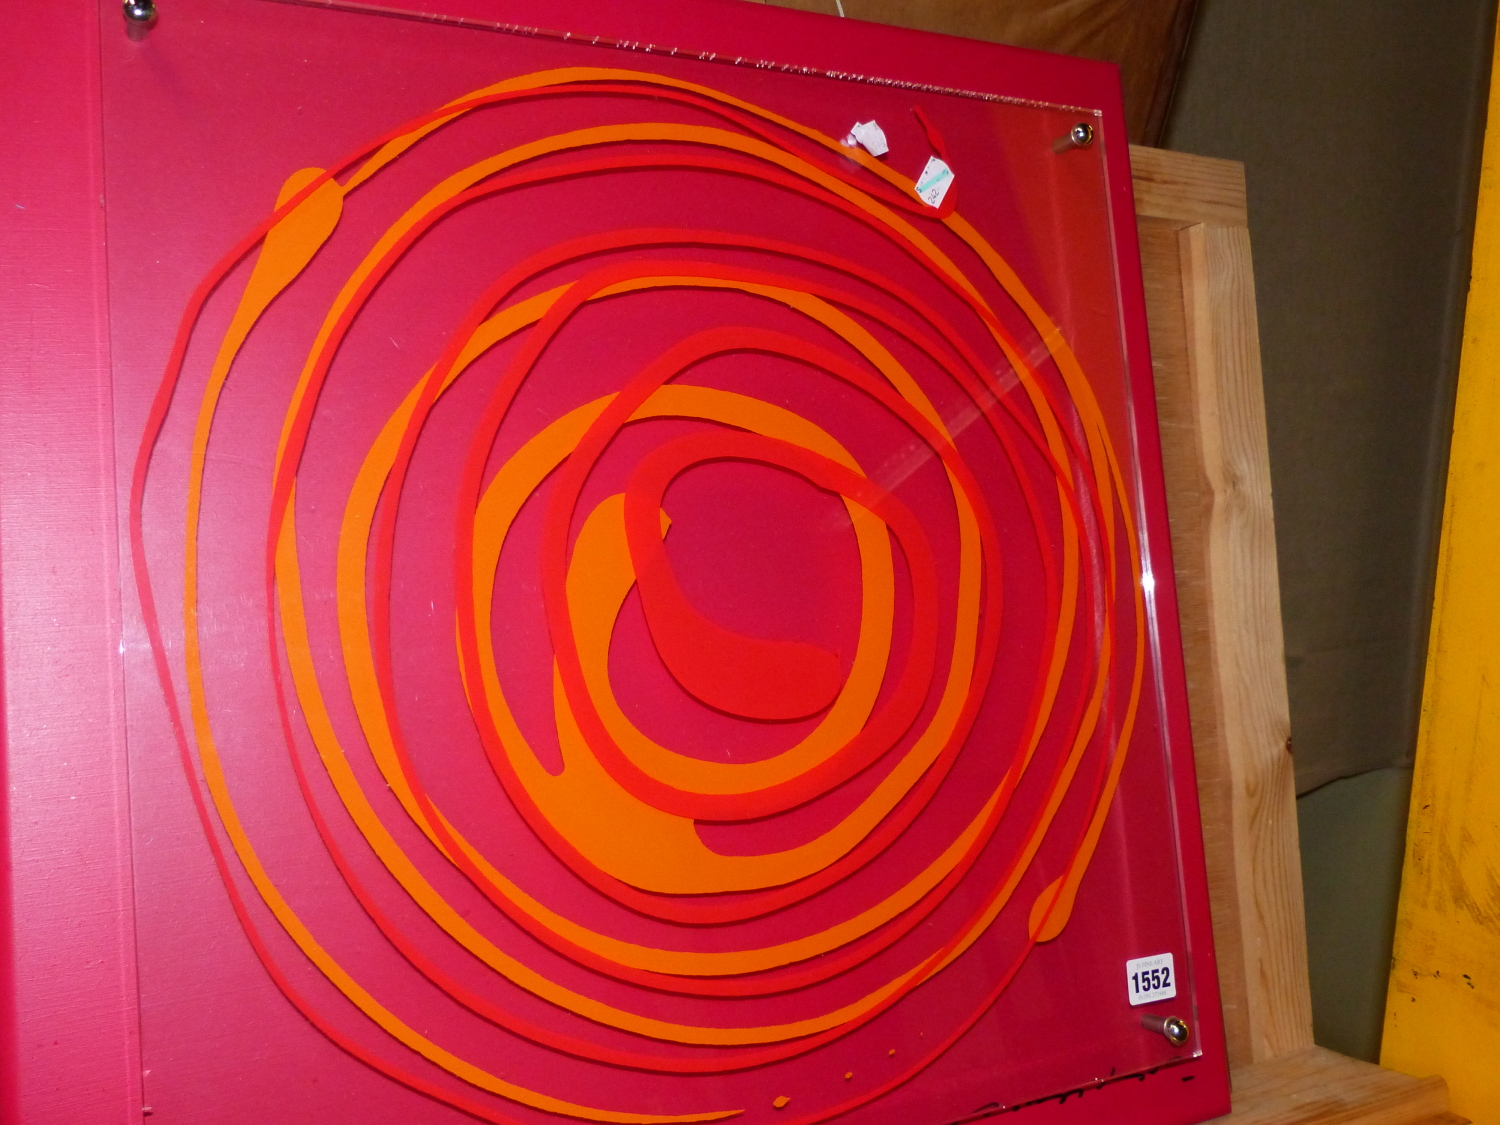 A PAINTED MODERNIST PERSPEX WALL PLAQUE, INDISTINCTLY SIGNED. 58 x 58cms. - Image 2 of 4